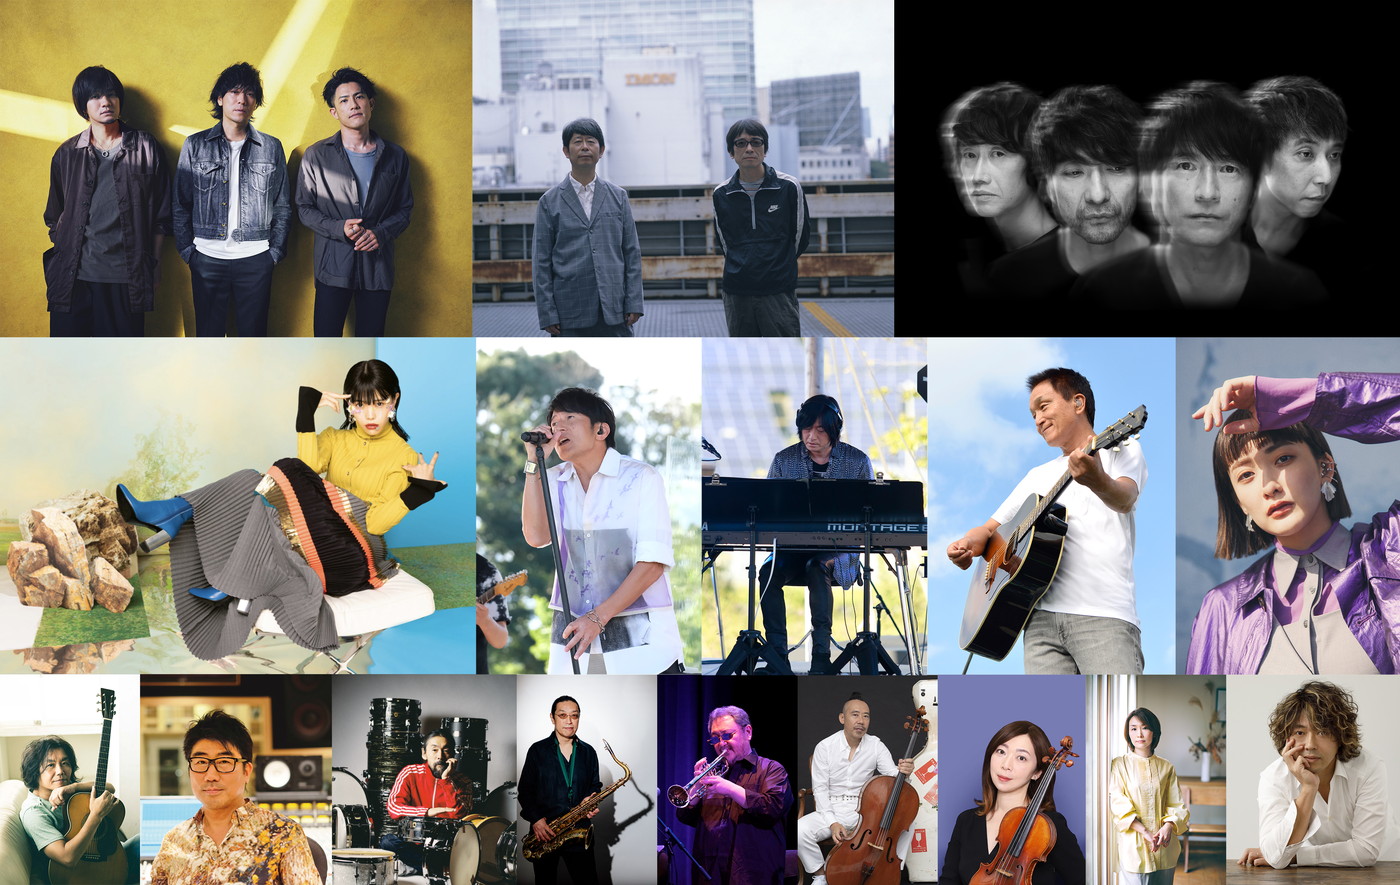 『ap bank fes ’23』に、back number、Mr.Children、アイナ・ジ・エンド、小田和正、長屋晴子（緑黄色社会）、真心ブラザーズの出演が決定 - 画像一覧（3/3）